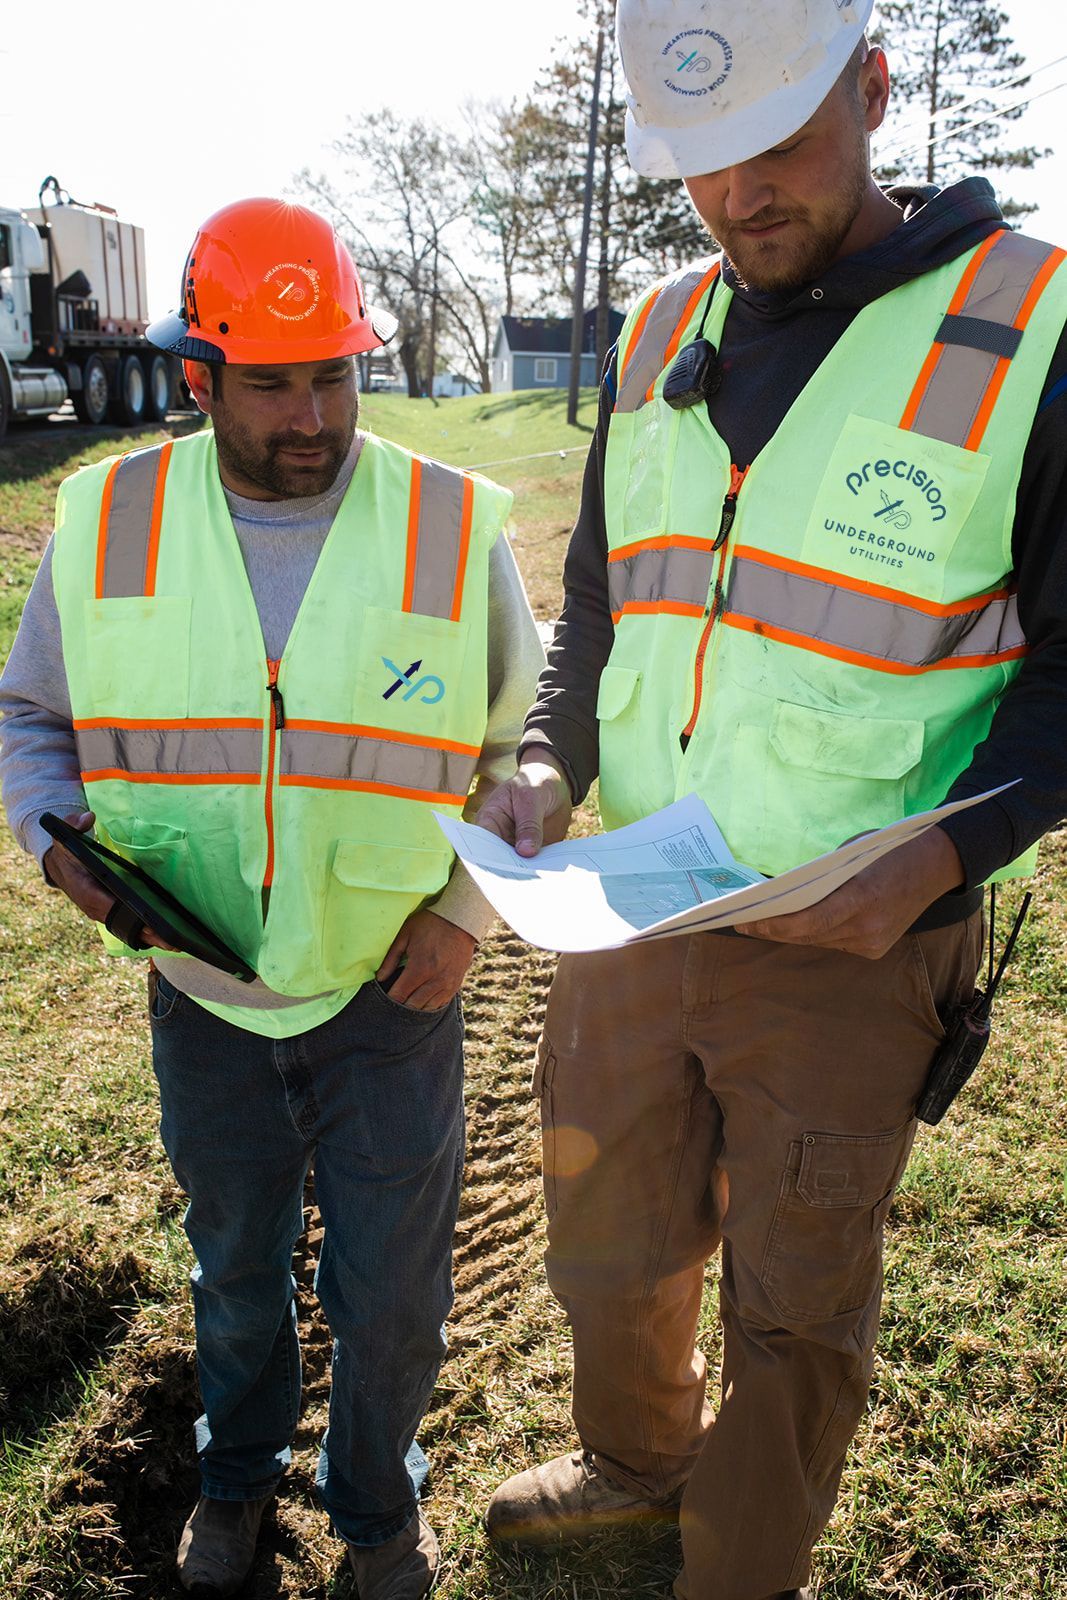 Underground Utility workers looking at map